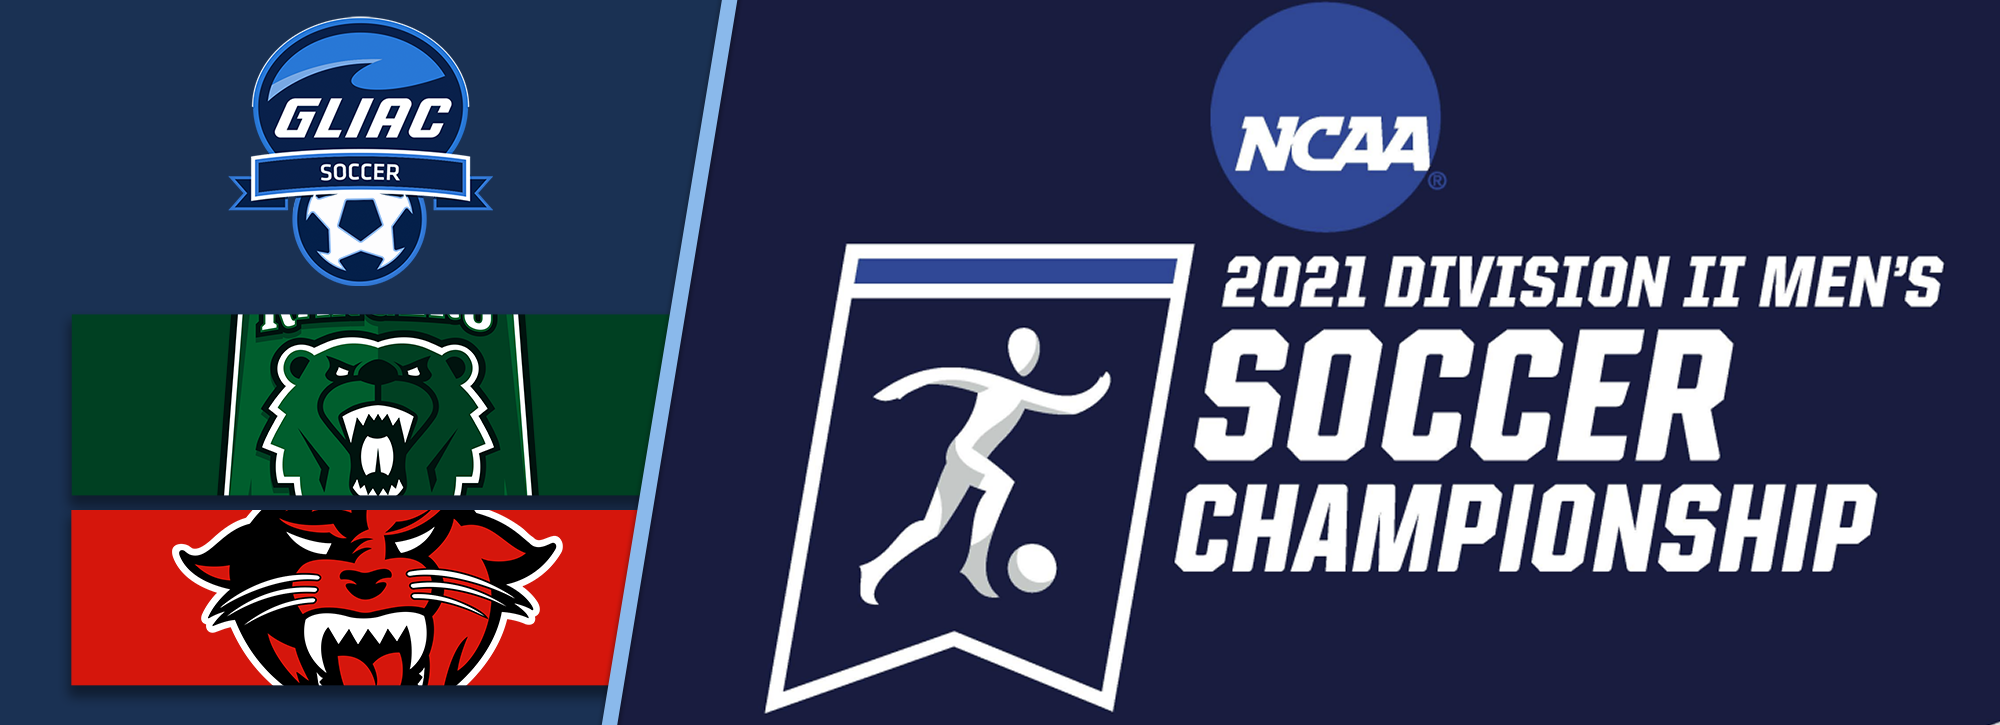 Parkside and Davenport punch tickets to NCAA Division II Men's Soccer postseason